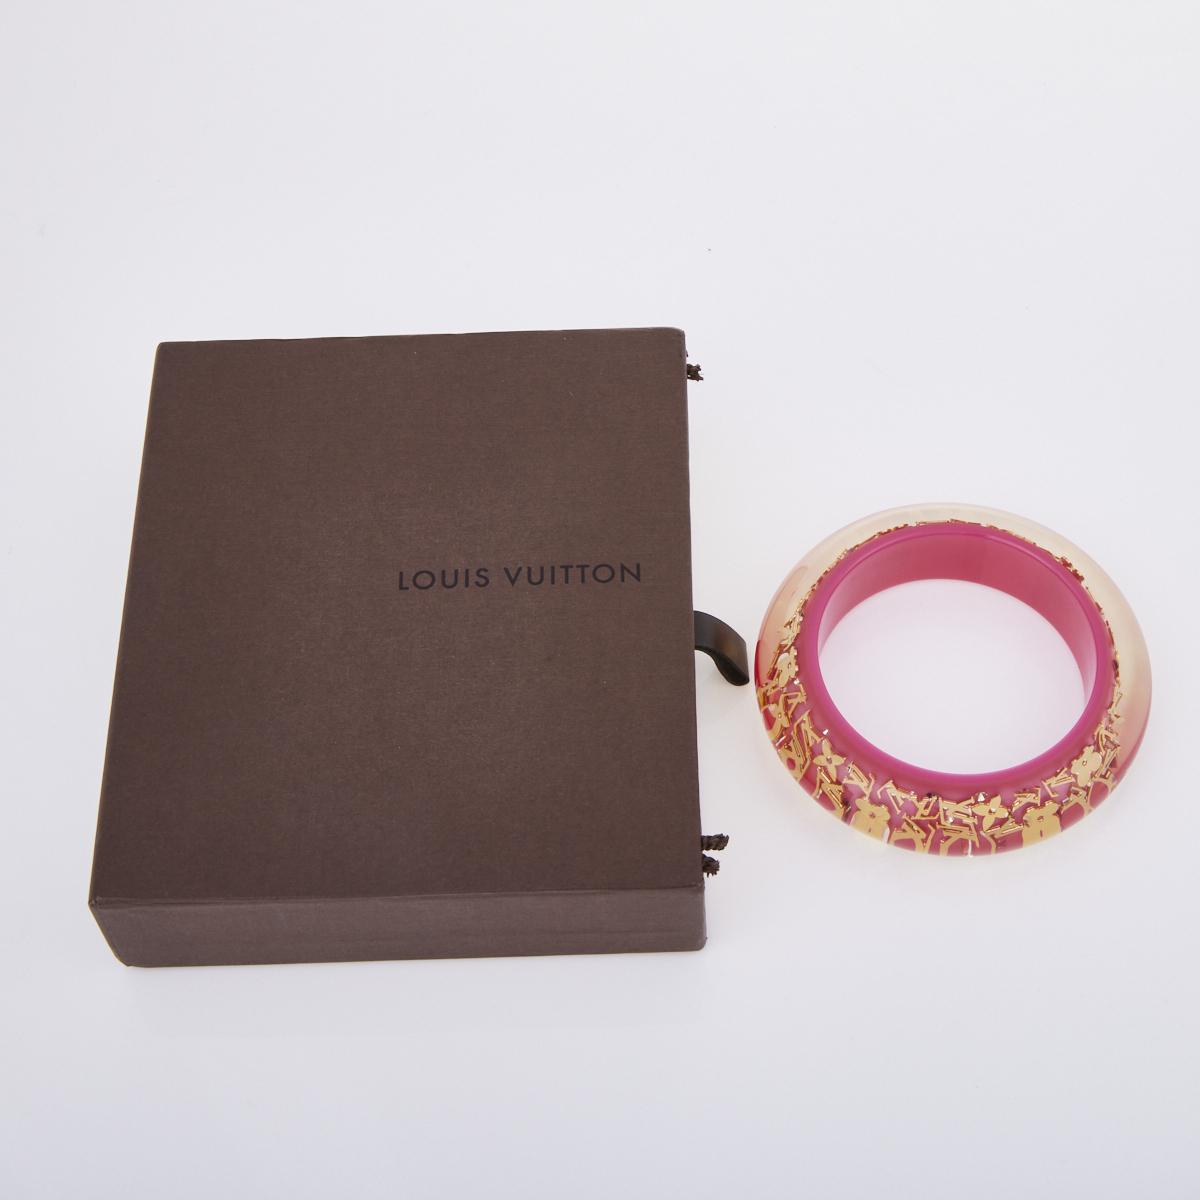 Louis Vuitton Resin Inclusion Bangle with Box